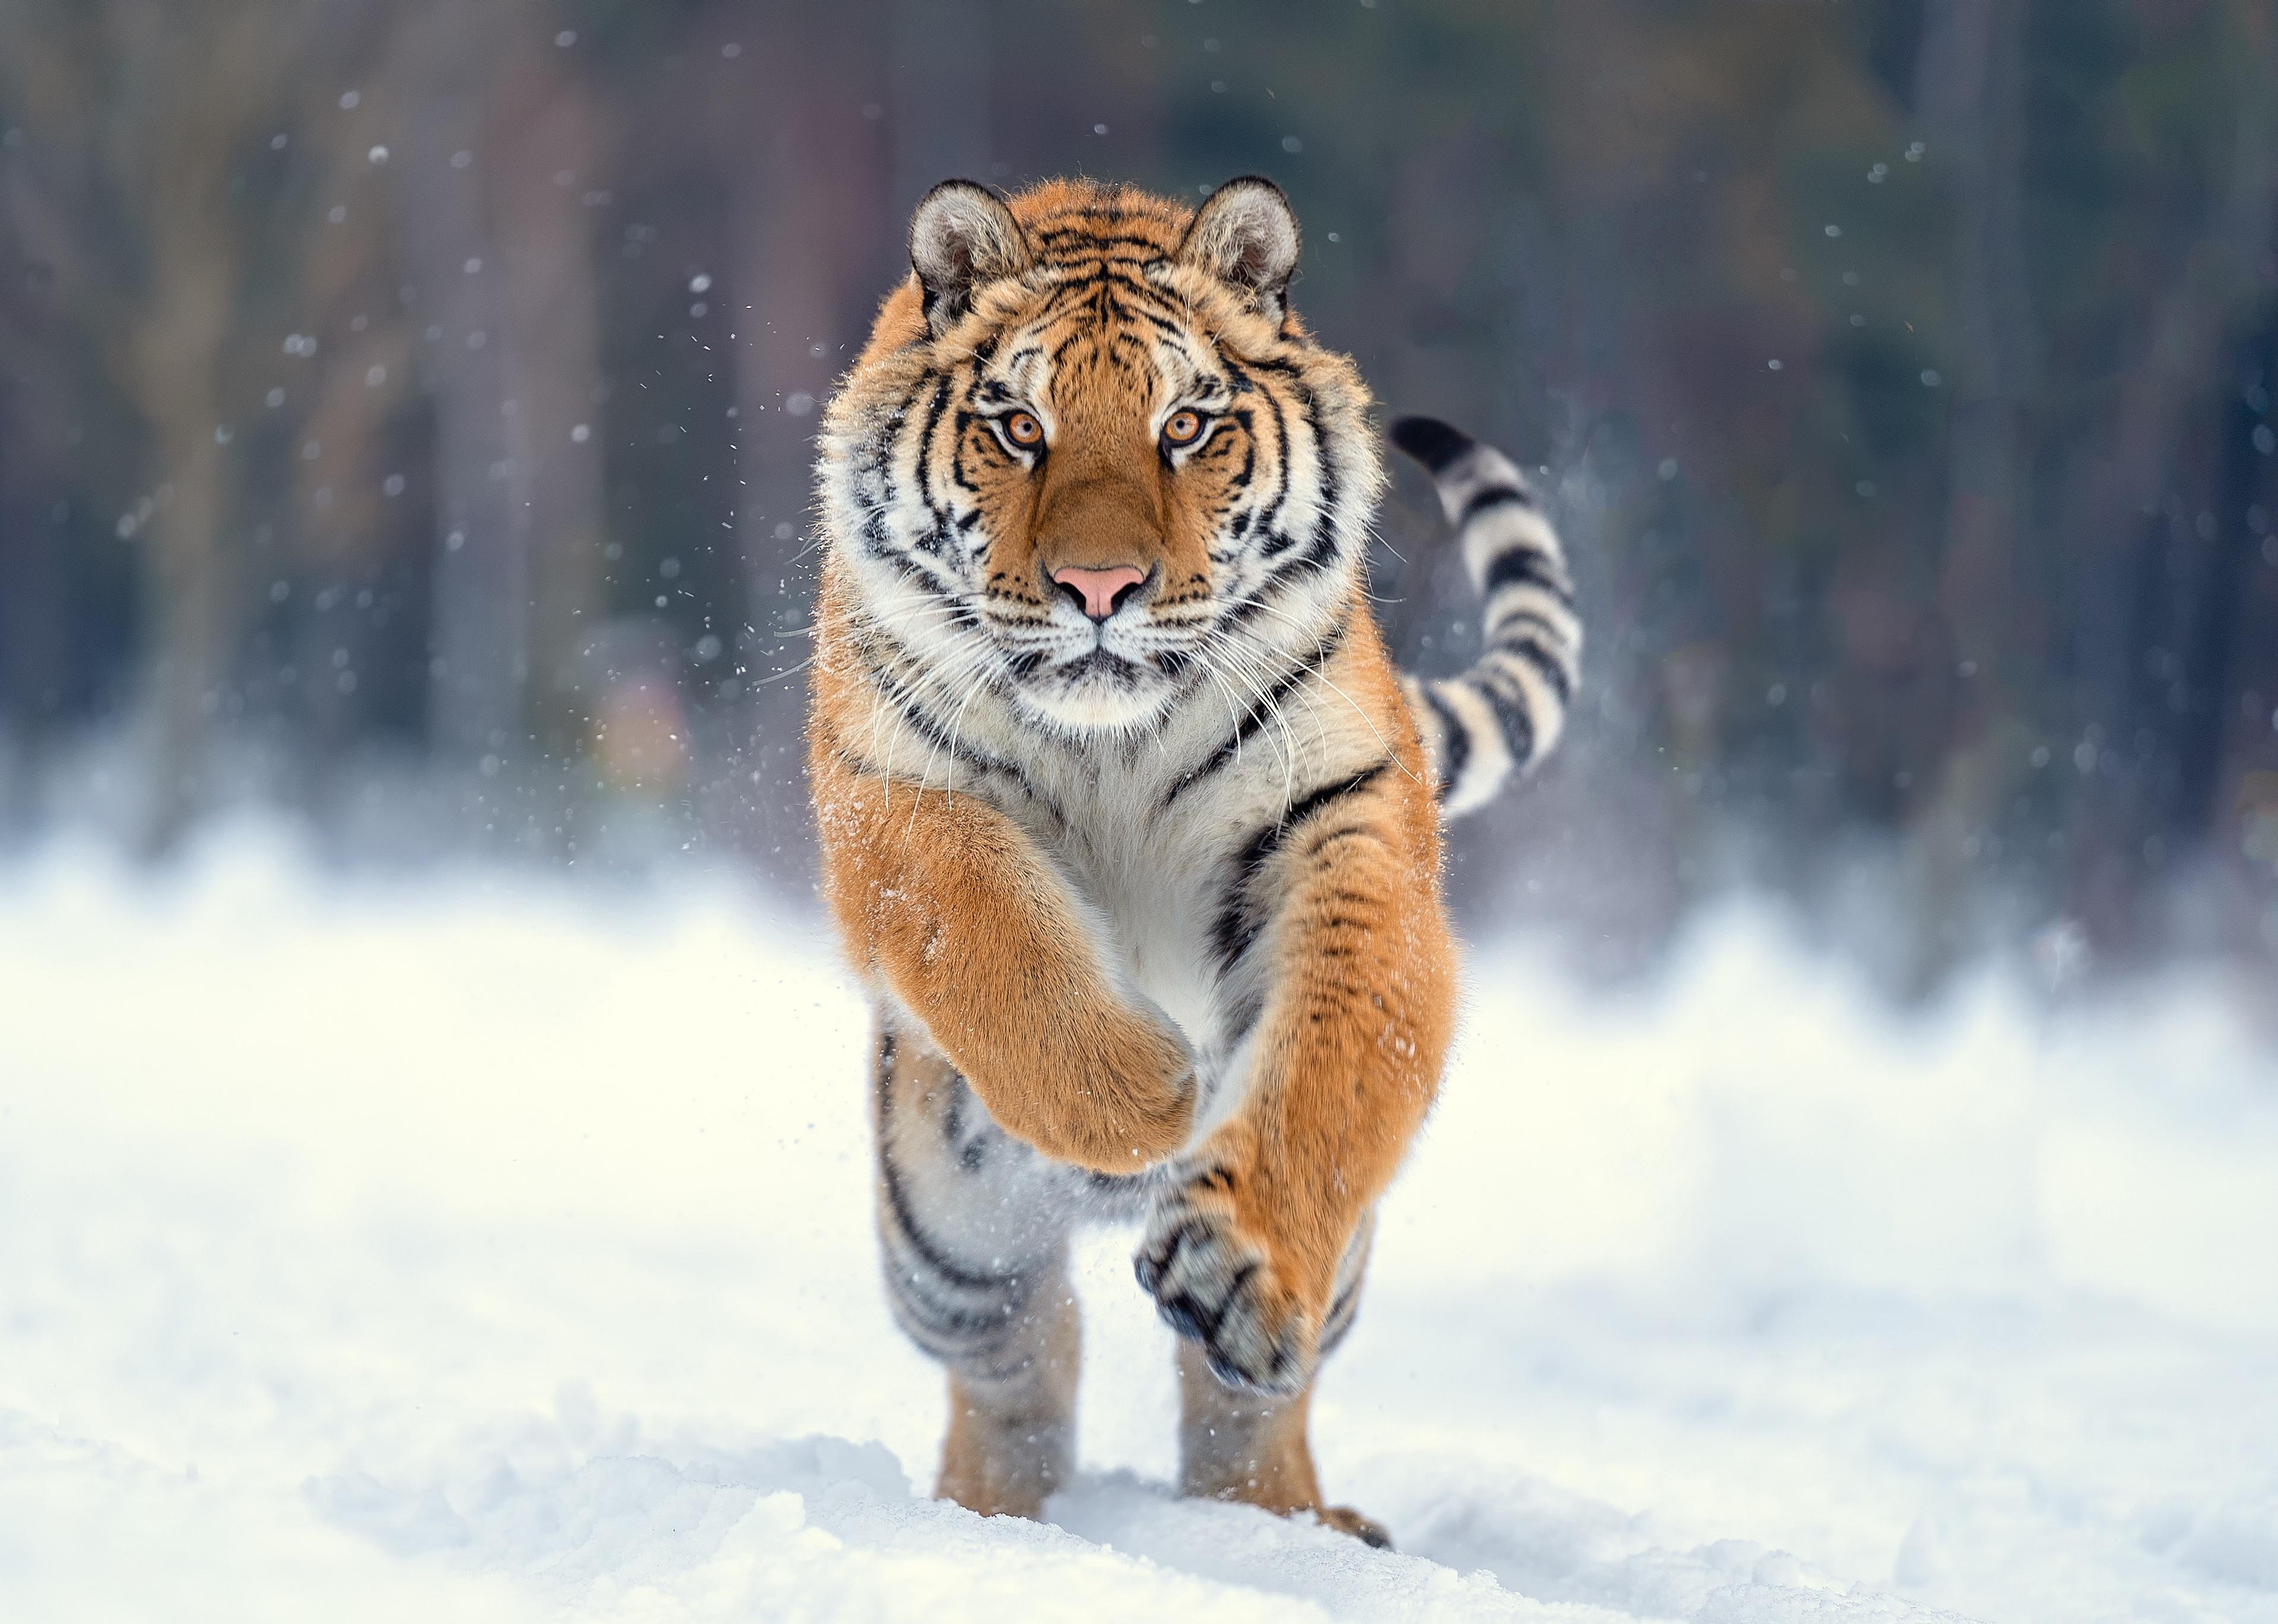 Tiger jumping in snow.